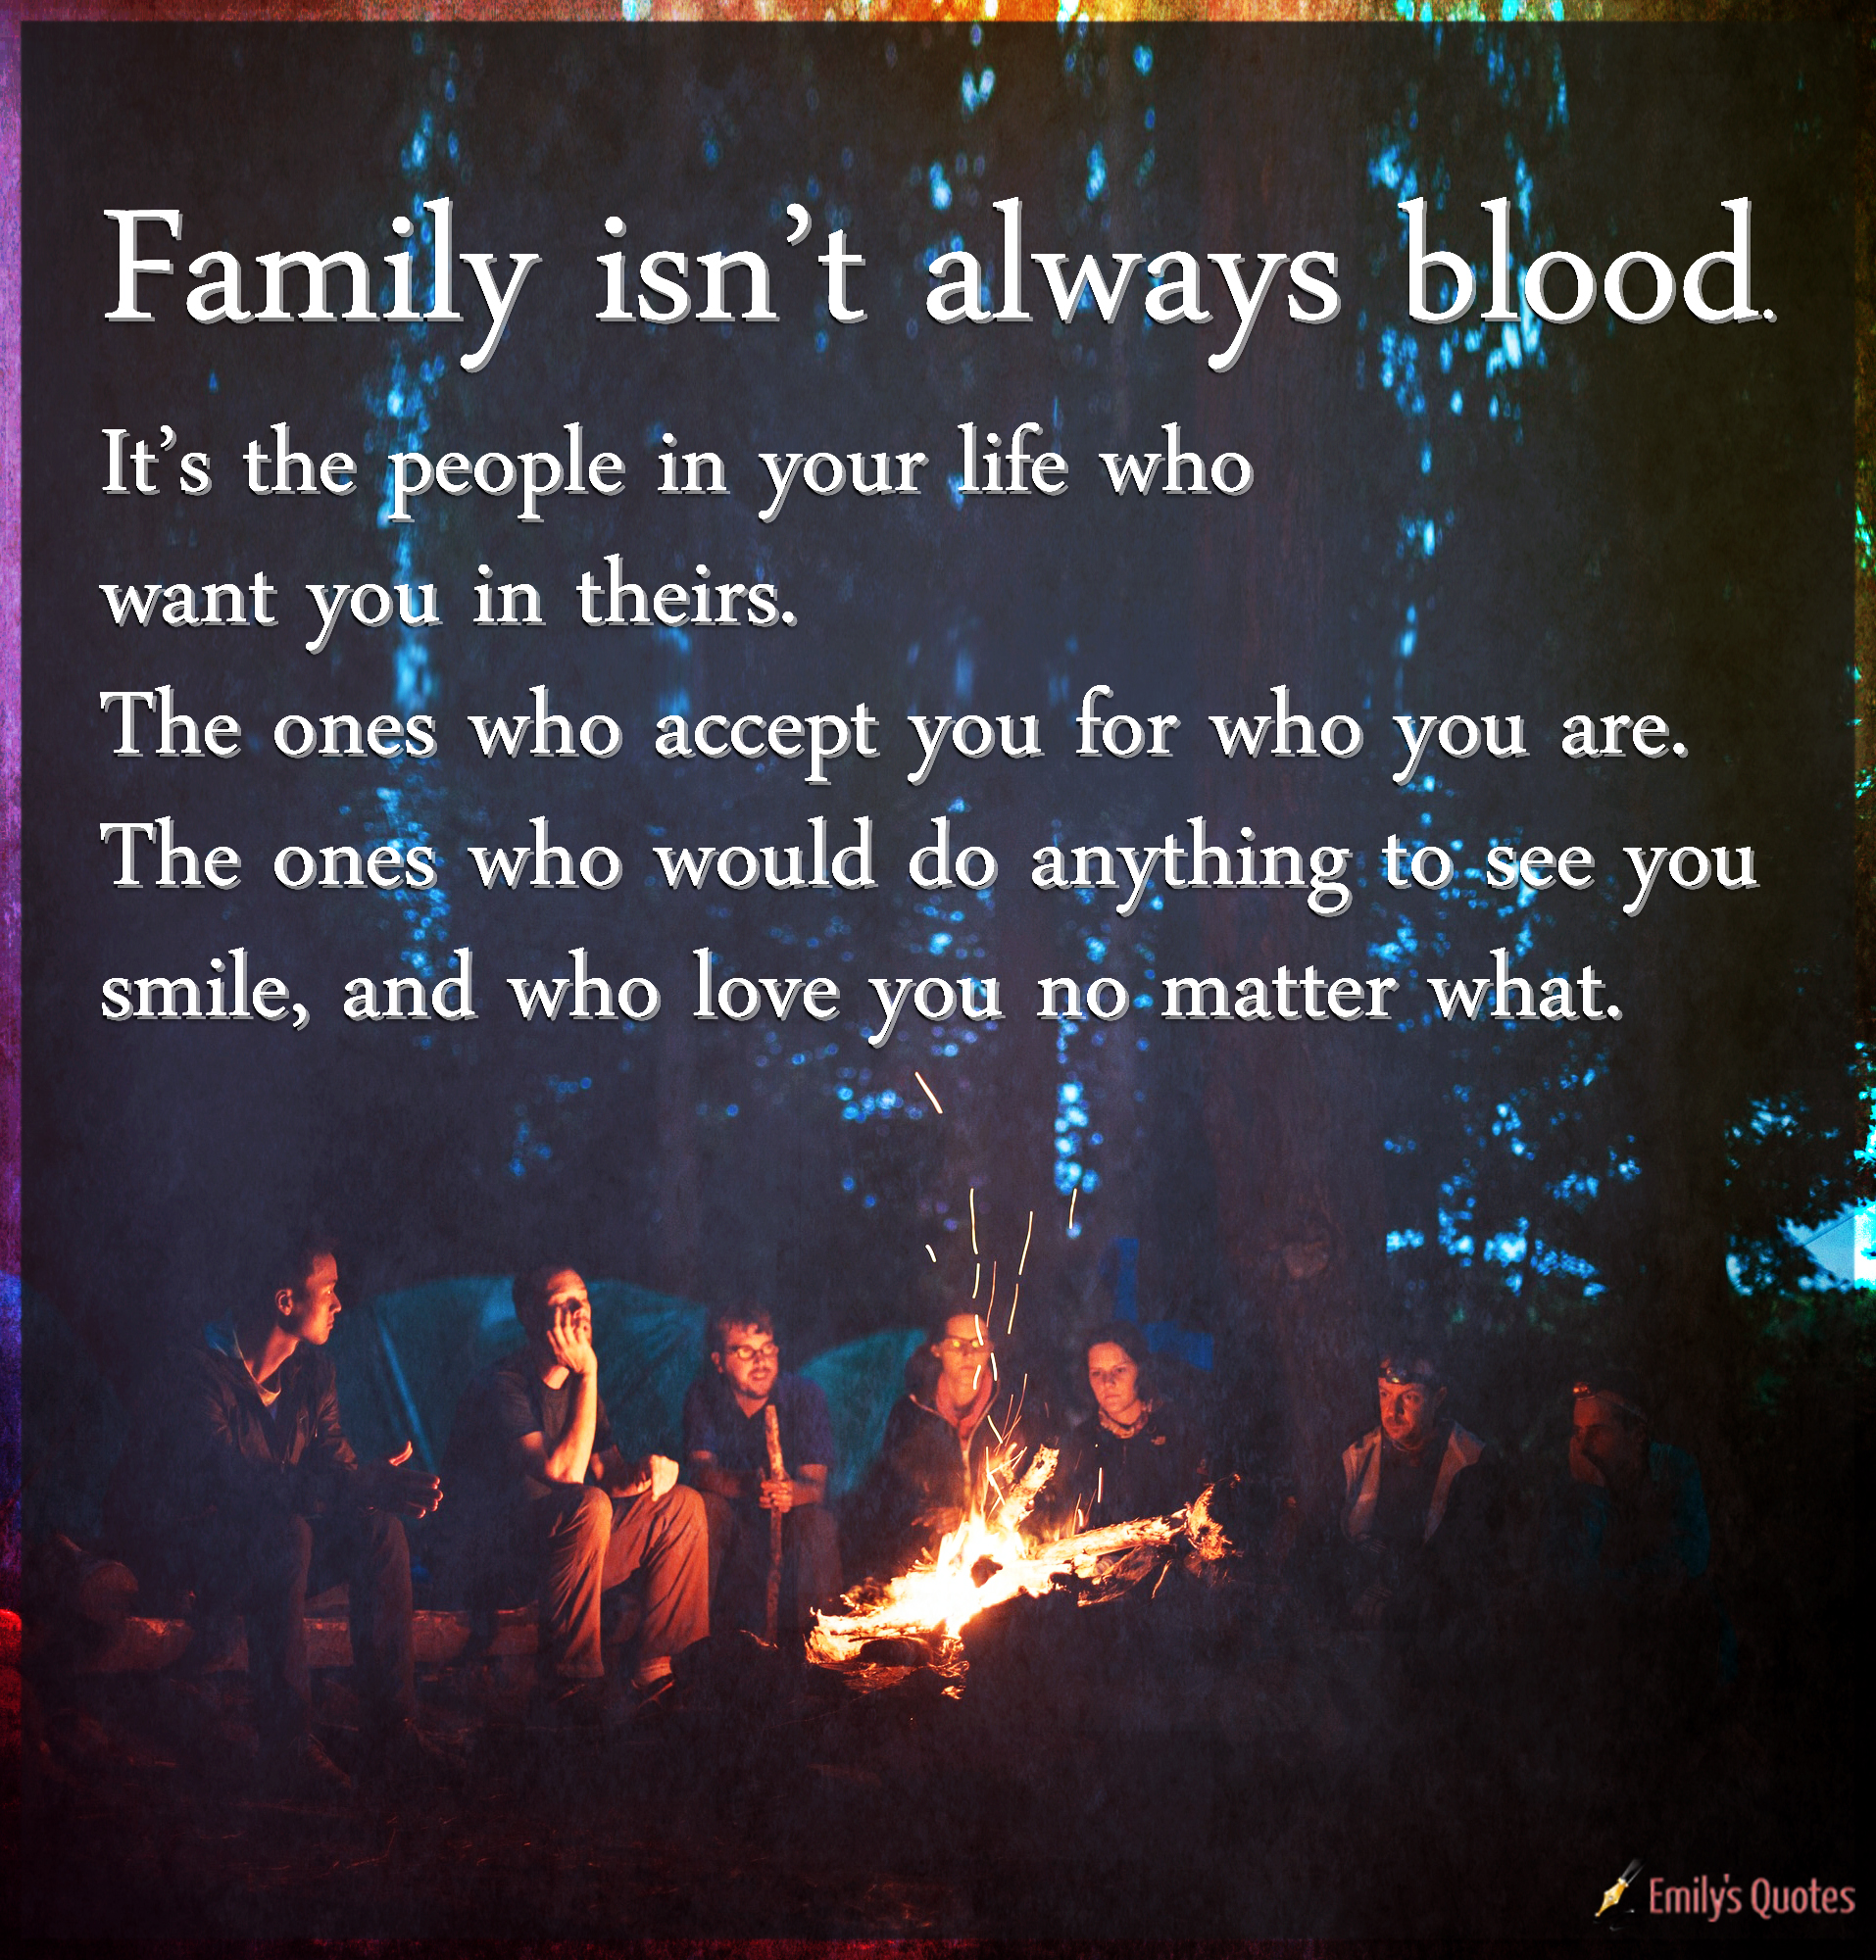 Family isn’t always blood. It’s the people in your life who want you in theirs